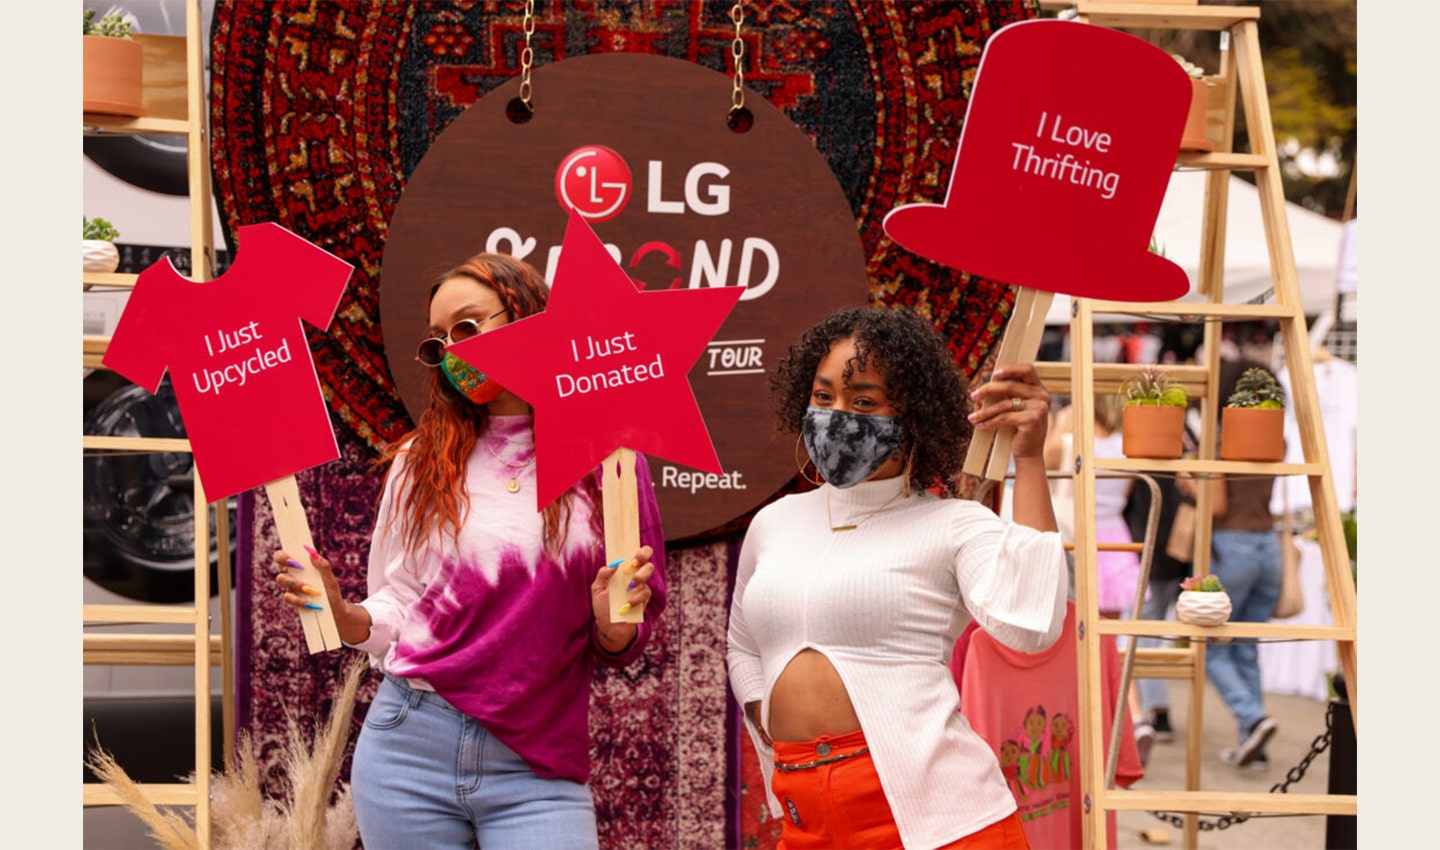 Two people holding up signs to help promote The Second Life Campaign and encourage more people to donate and upcycle their clothing